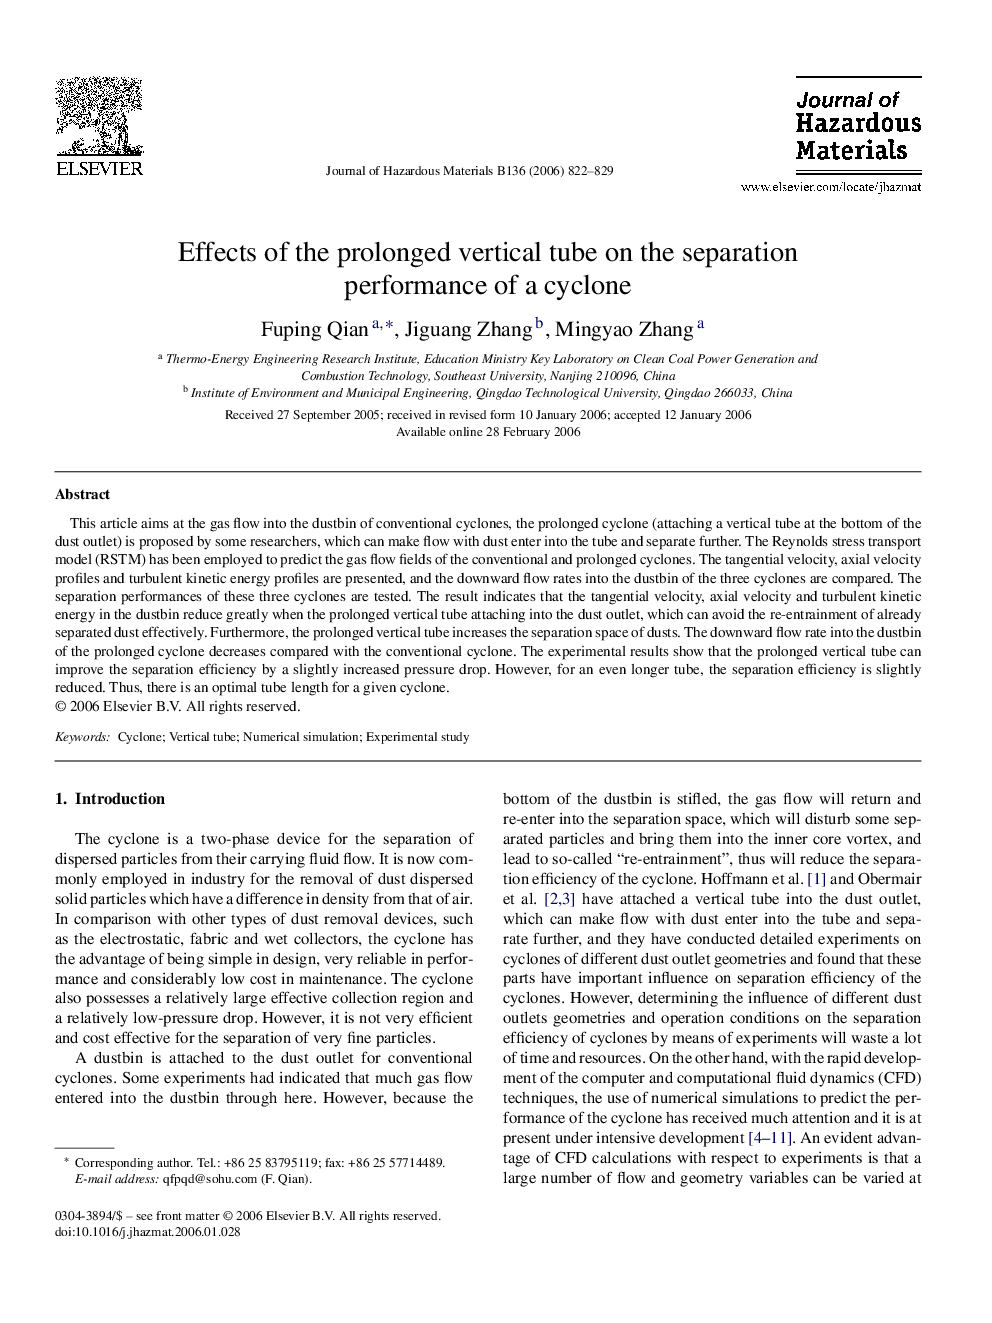 Effects of the prolonged vertical tube on the separation performance of a cyclone